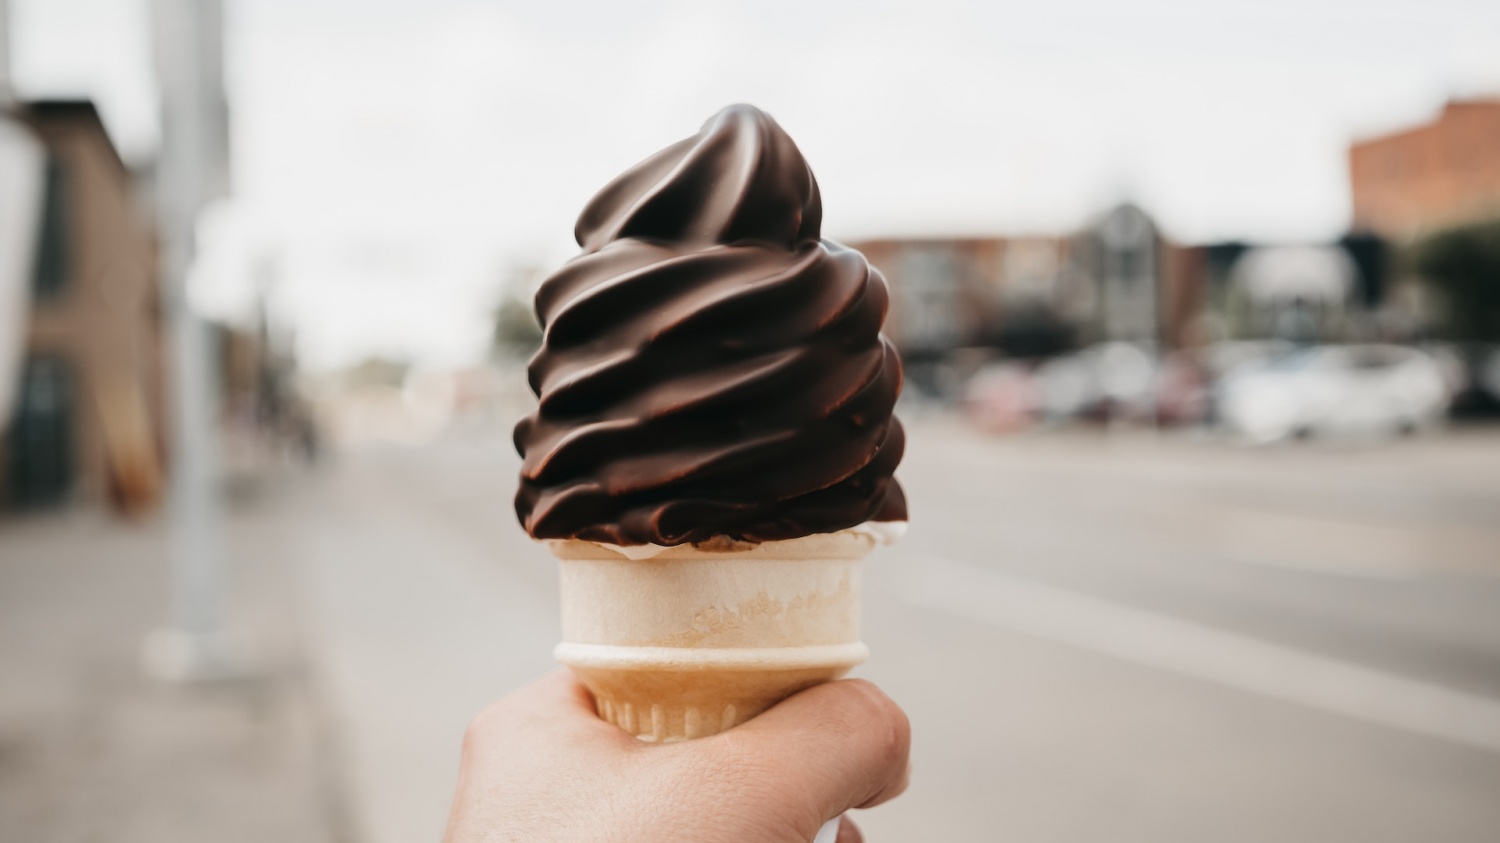 Real Kosher Ice Cream Recalls Soft Serve On The Go Cups After FDA Rules Out Potential Listeria Contamination